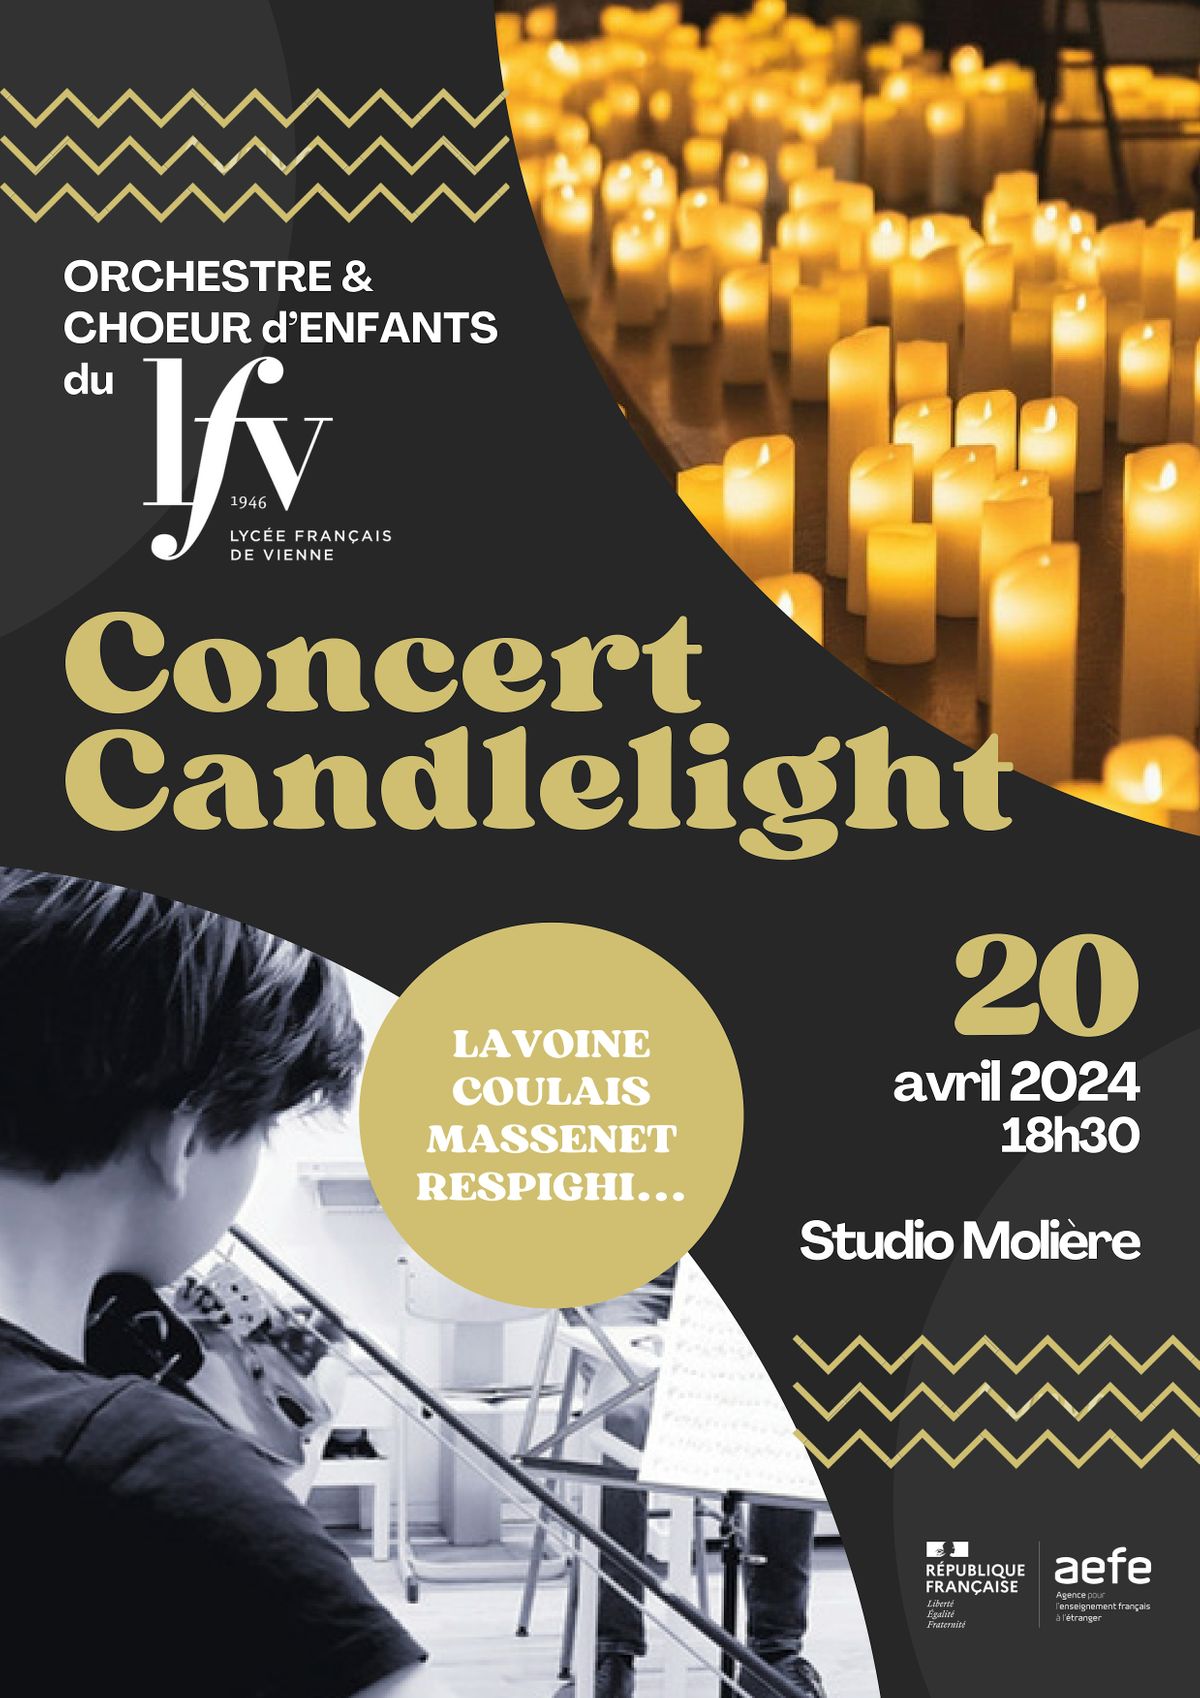 CANDLELIGHT - Concert